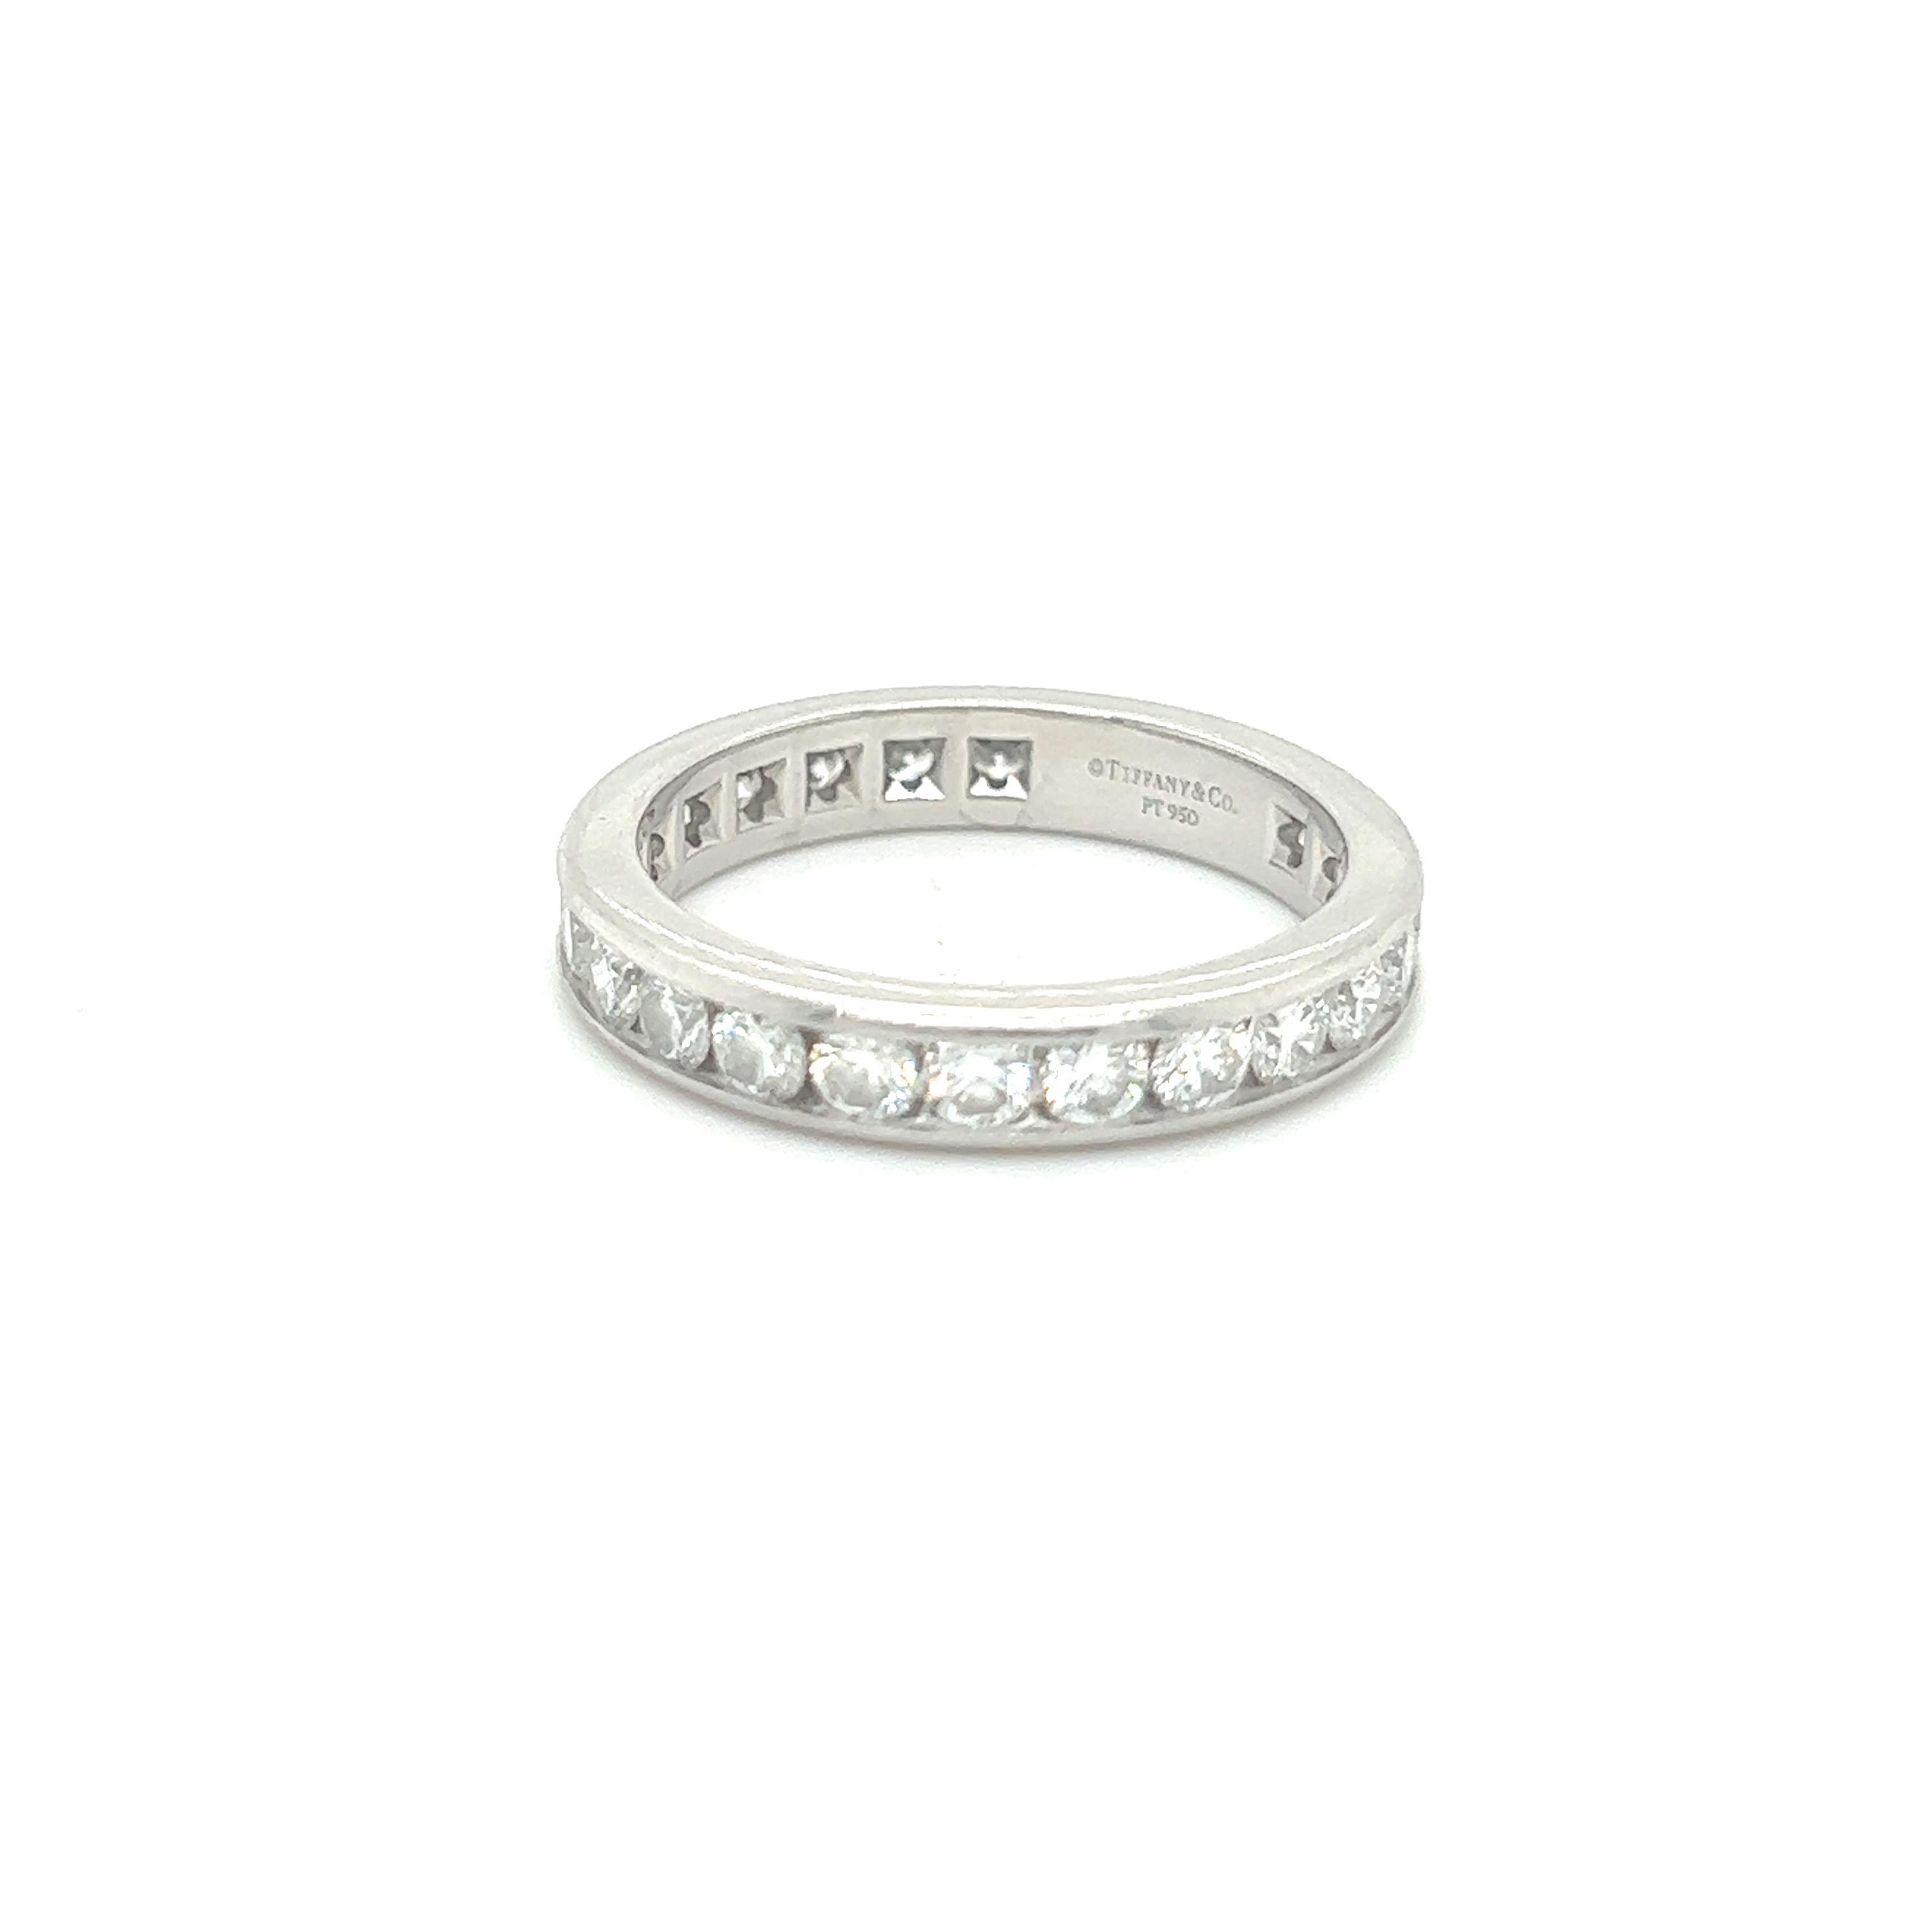 A Tiffany and Co. diamond eternity ring, set with round brilliant cut diamonds in a channel setting around the full circumference, with a total estimated diamond weight of 2.40ct, F, G Colour VS 

Signed  'Tiffany & Co. PT 950', ring size T 1/2.